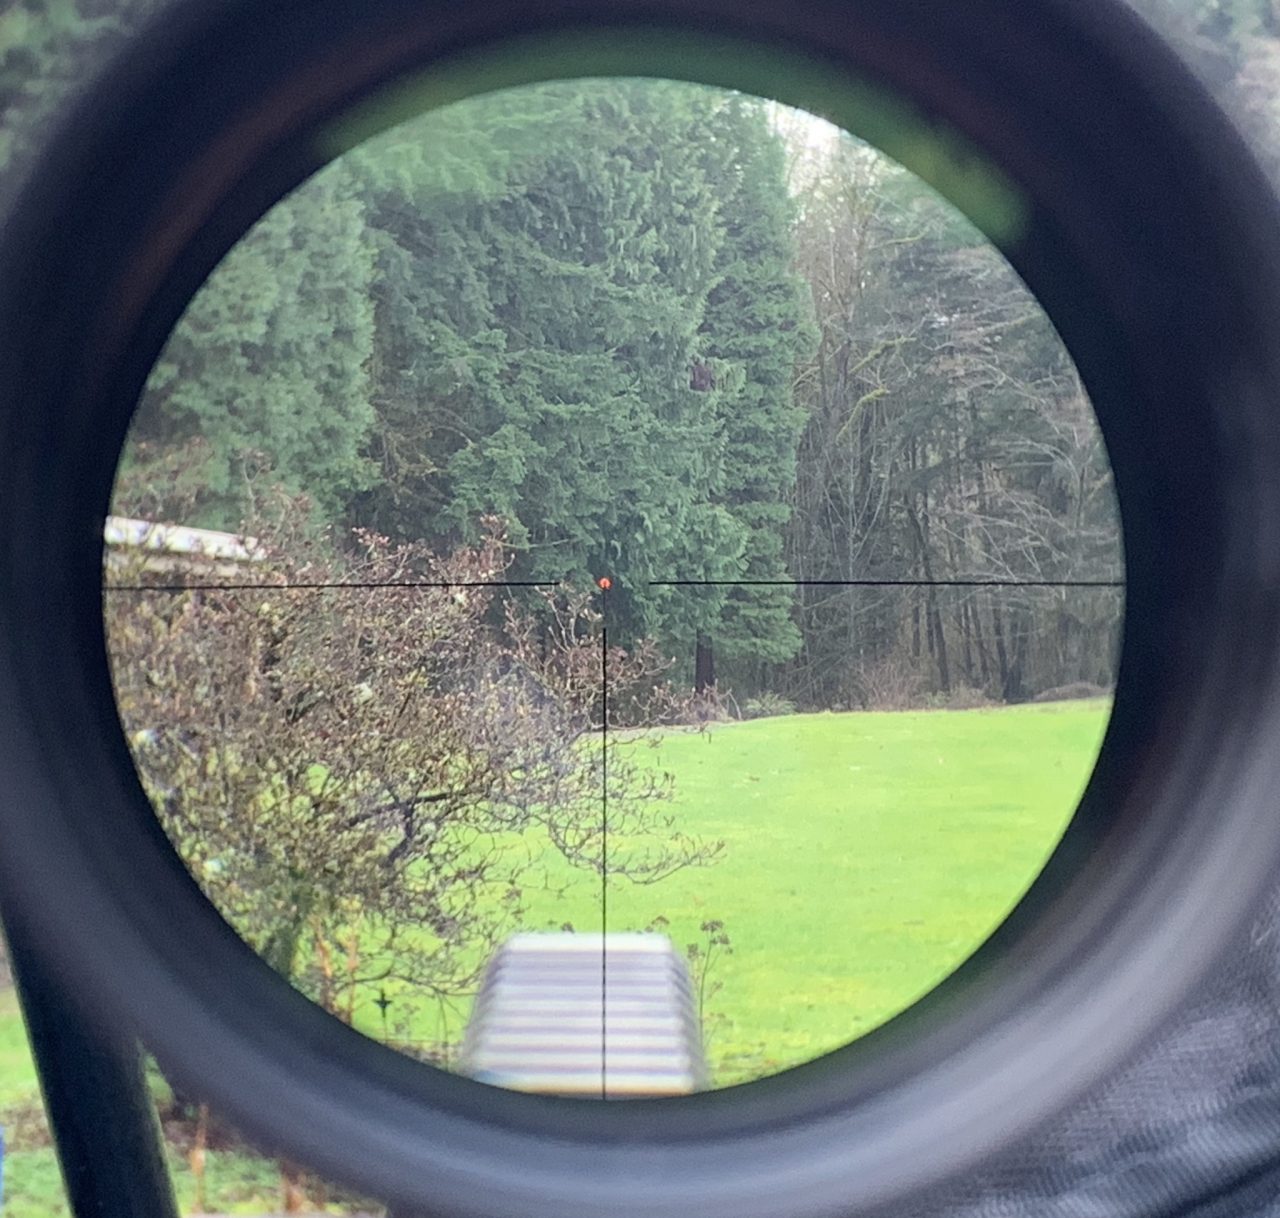 Reticle at 1x and about 5 or 6 illumination setting